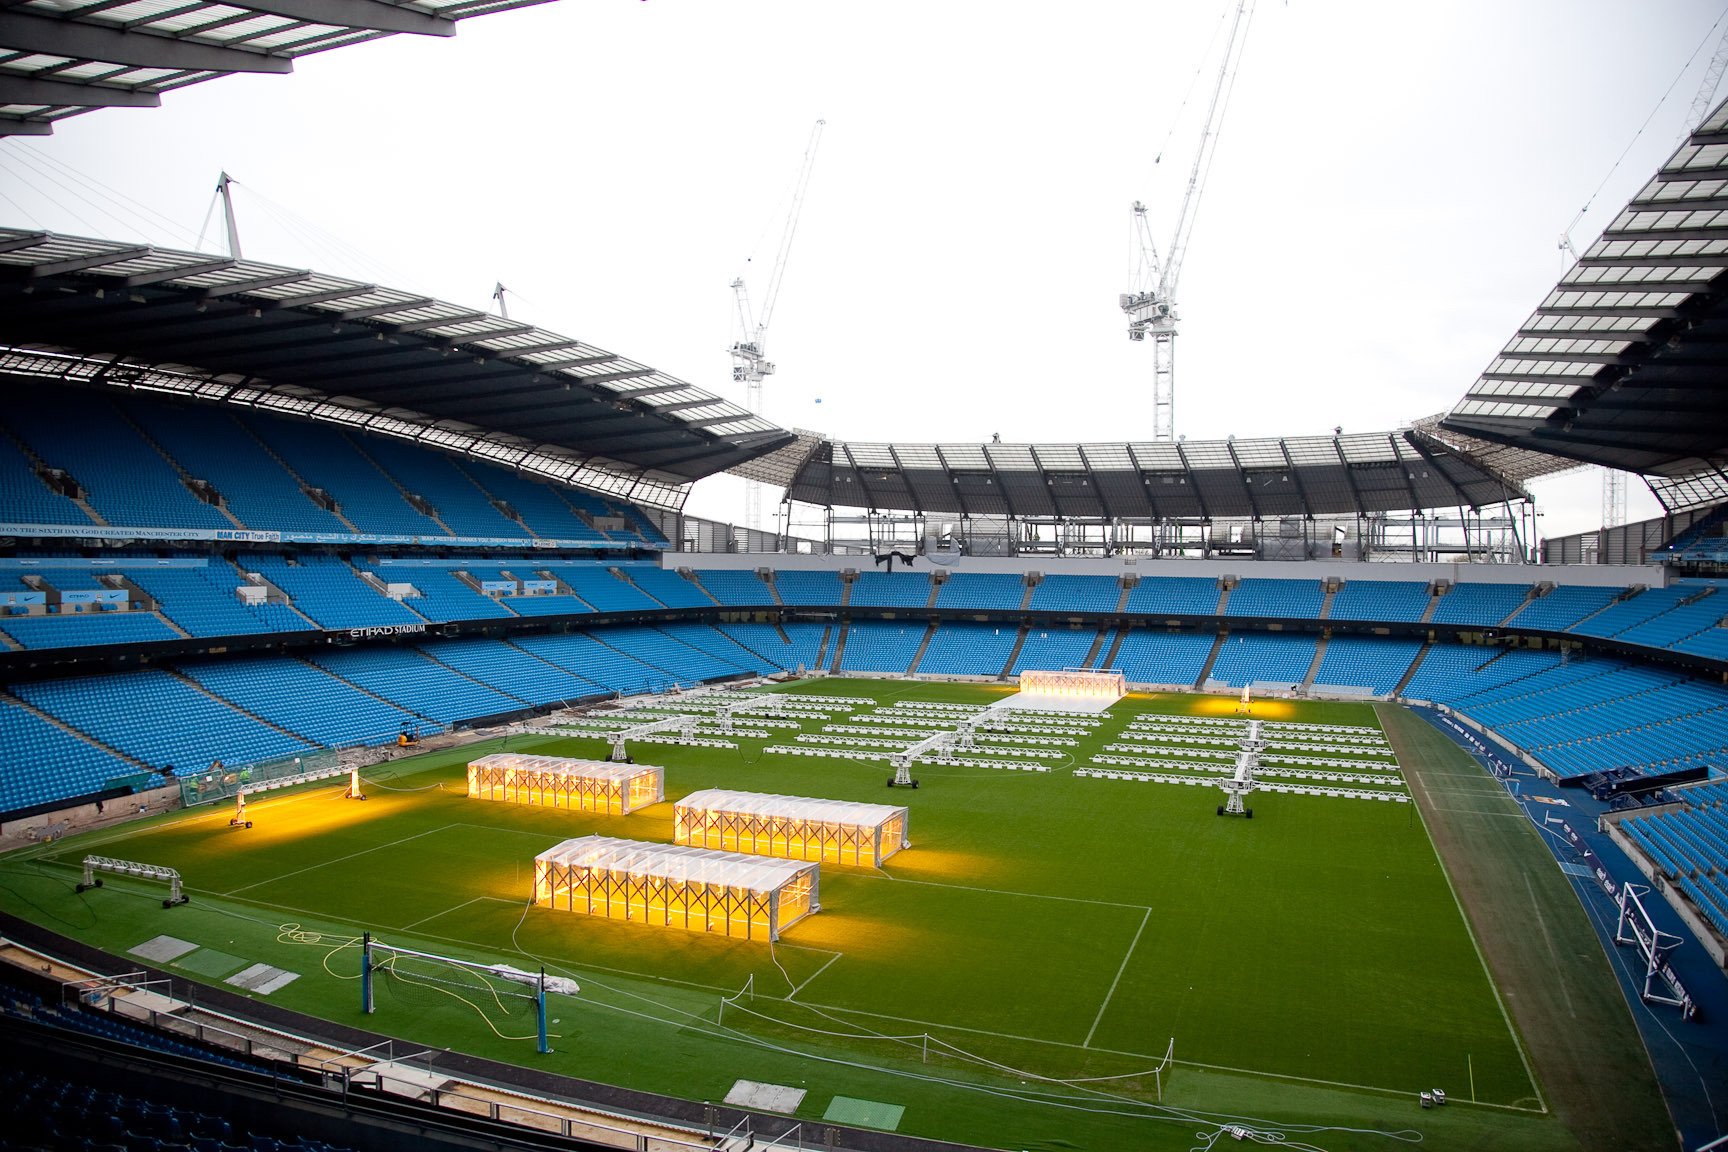 Inside Manchester City S Etihad Stadium Exclusive Images From Behind The Scenes Bleacher Report Latest News Videos And Highlights